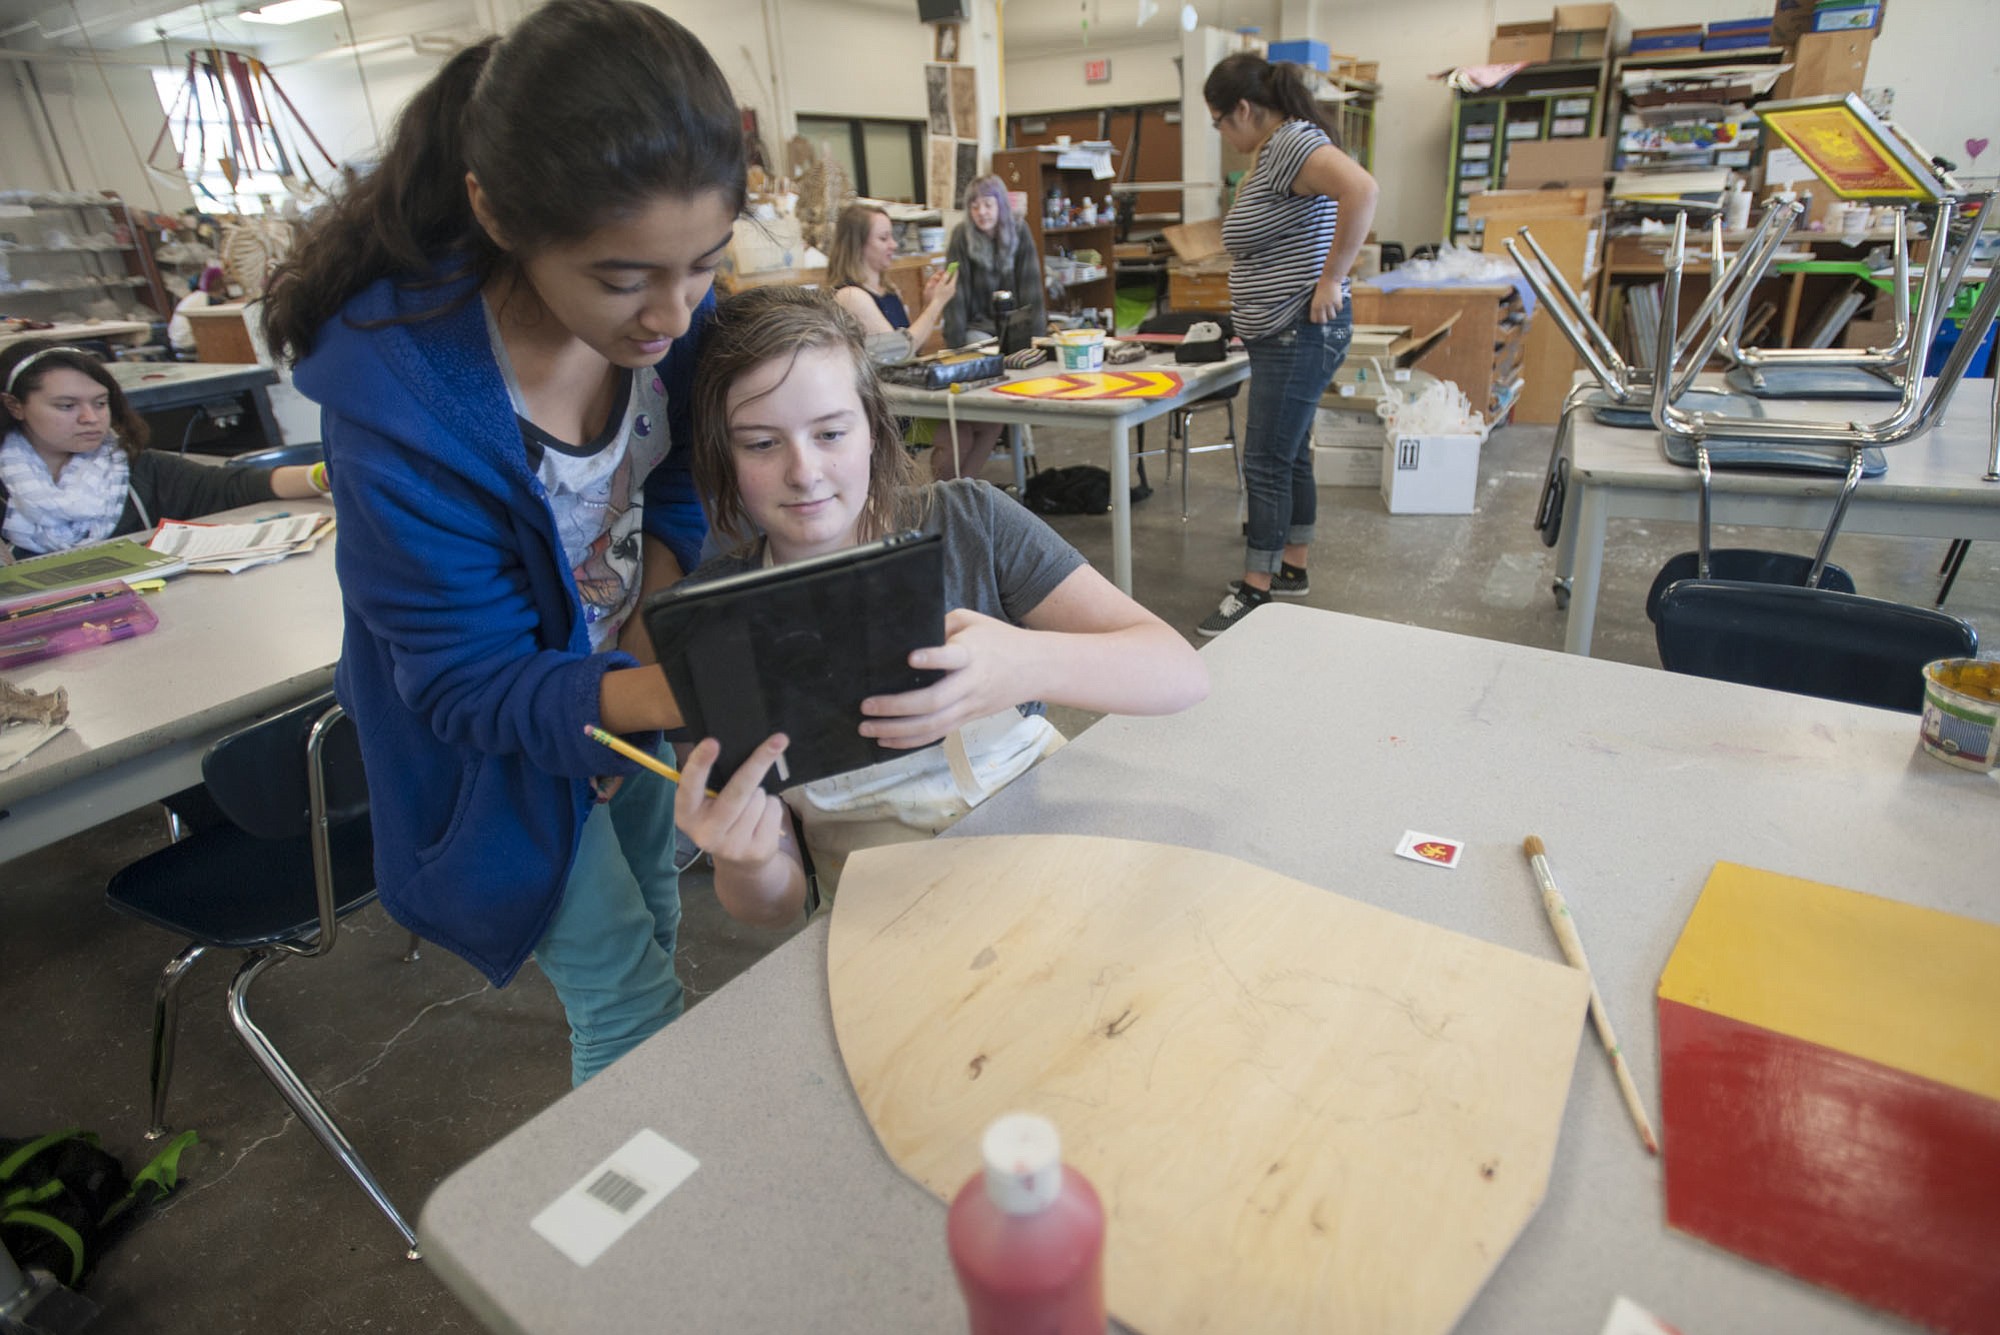 Savanna Falkner, a student at Vancouver School of Arts and Academics, uses an iPad earlier this month to show a classmate how she will paint a shield representing William de Lanvallei, an English baron during the 13th century.